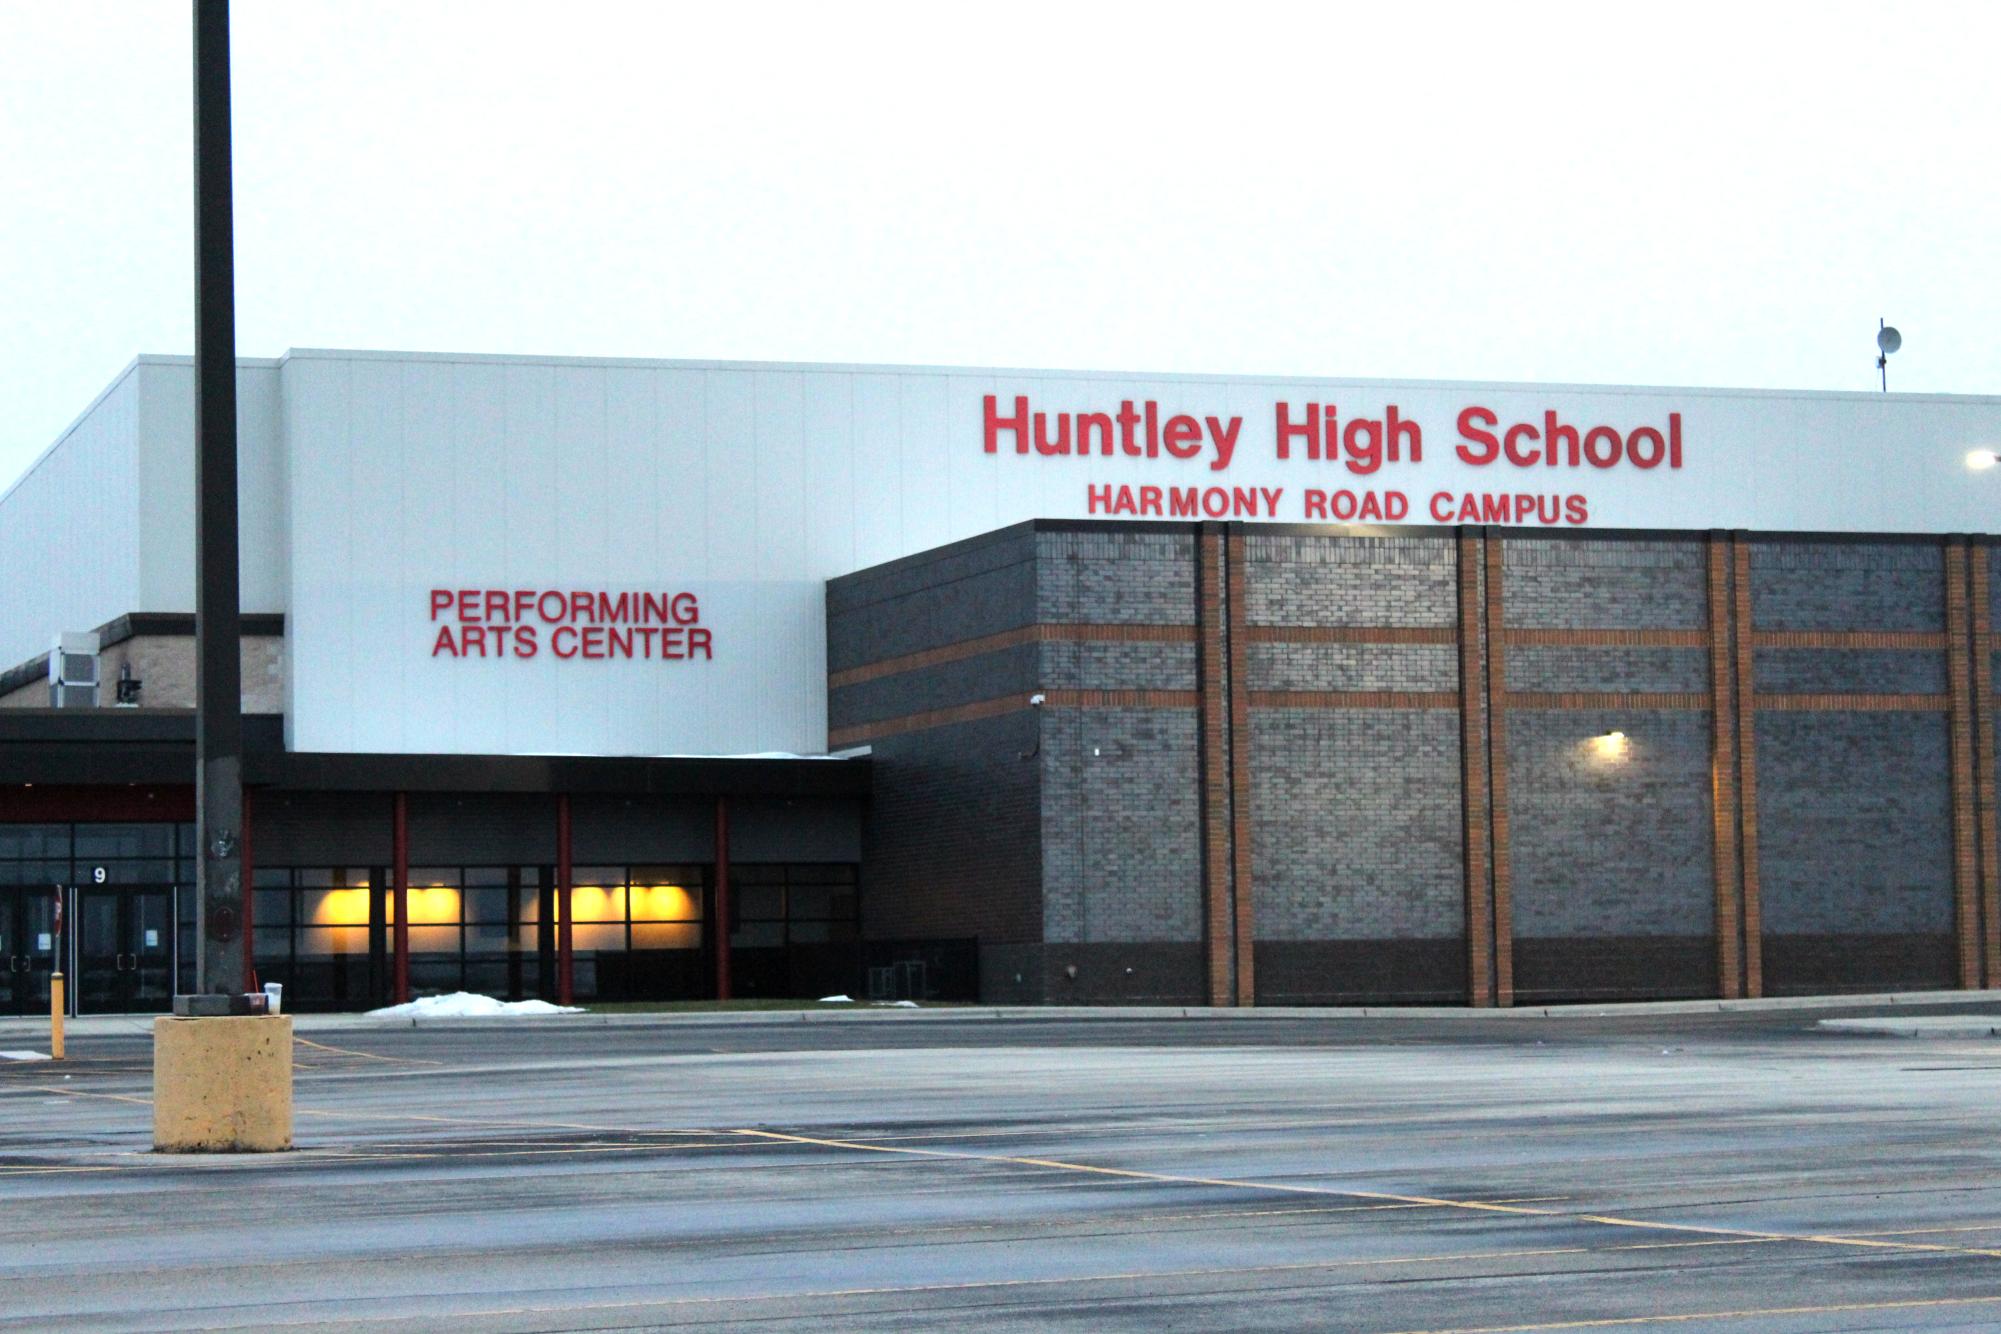 At the end of year, a local political group sent a new policy proposal to Huntley’s District 158 school board that could impact support for trans students. Though there are no such policies being proposed at MCHS, some wonder what could happen if more outside political groups influence school rules elsewhere in the county.